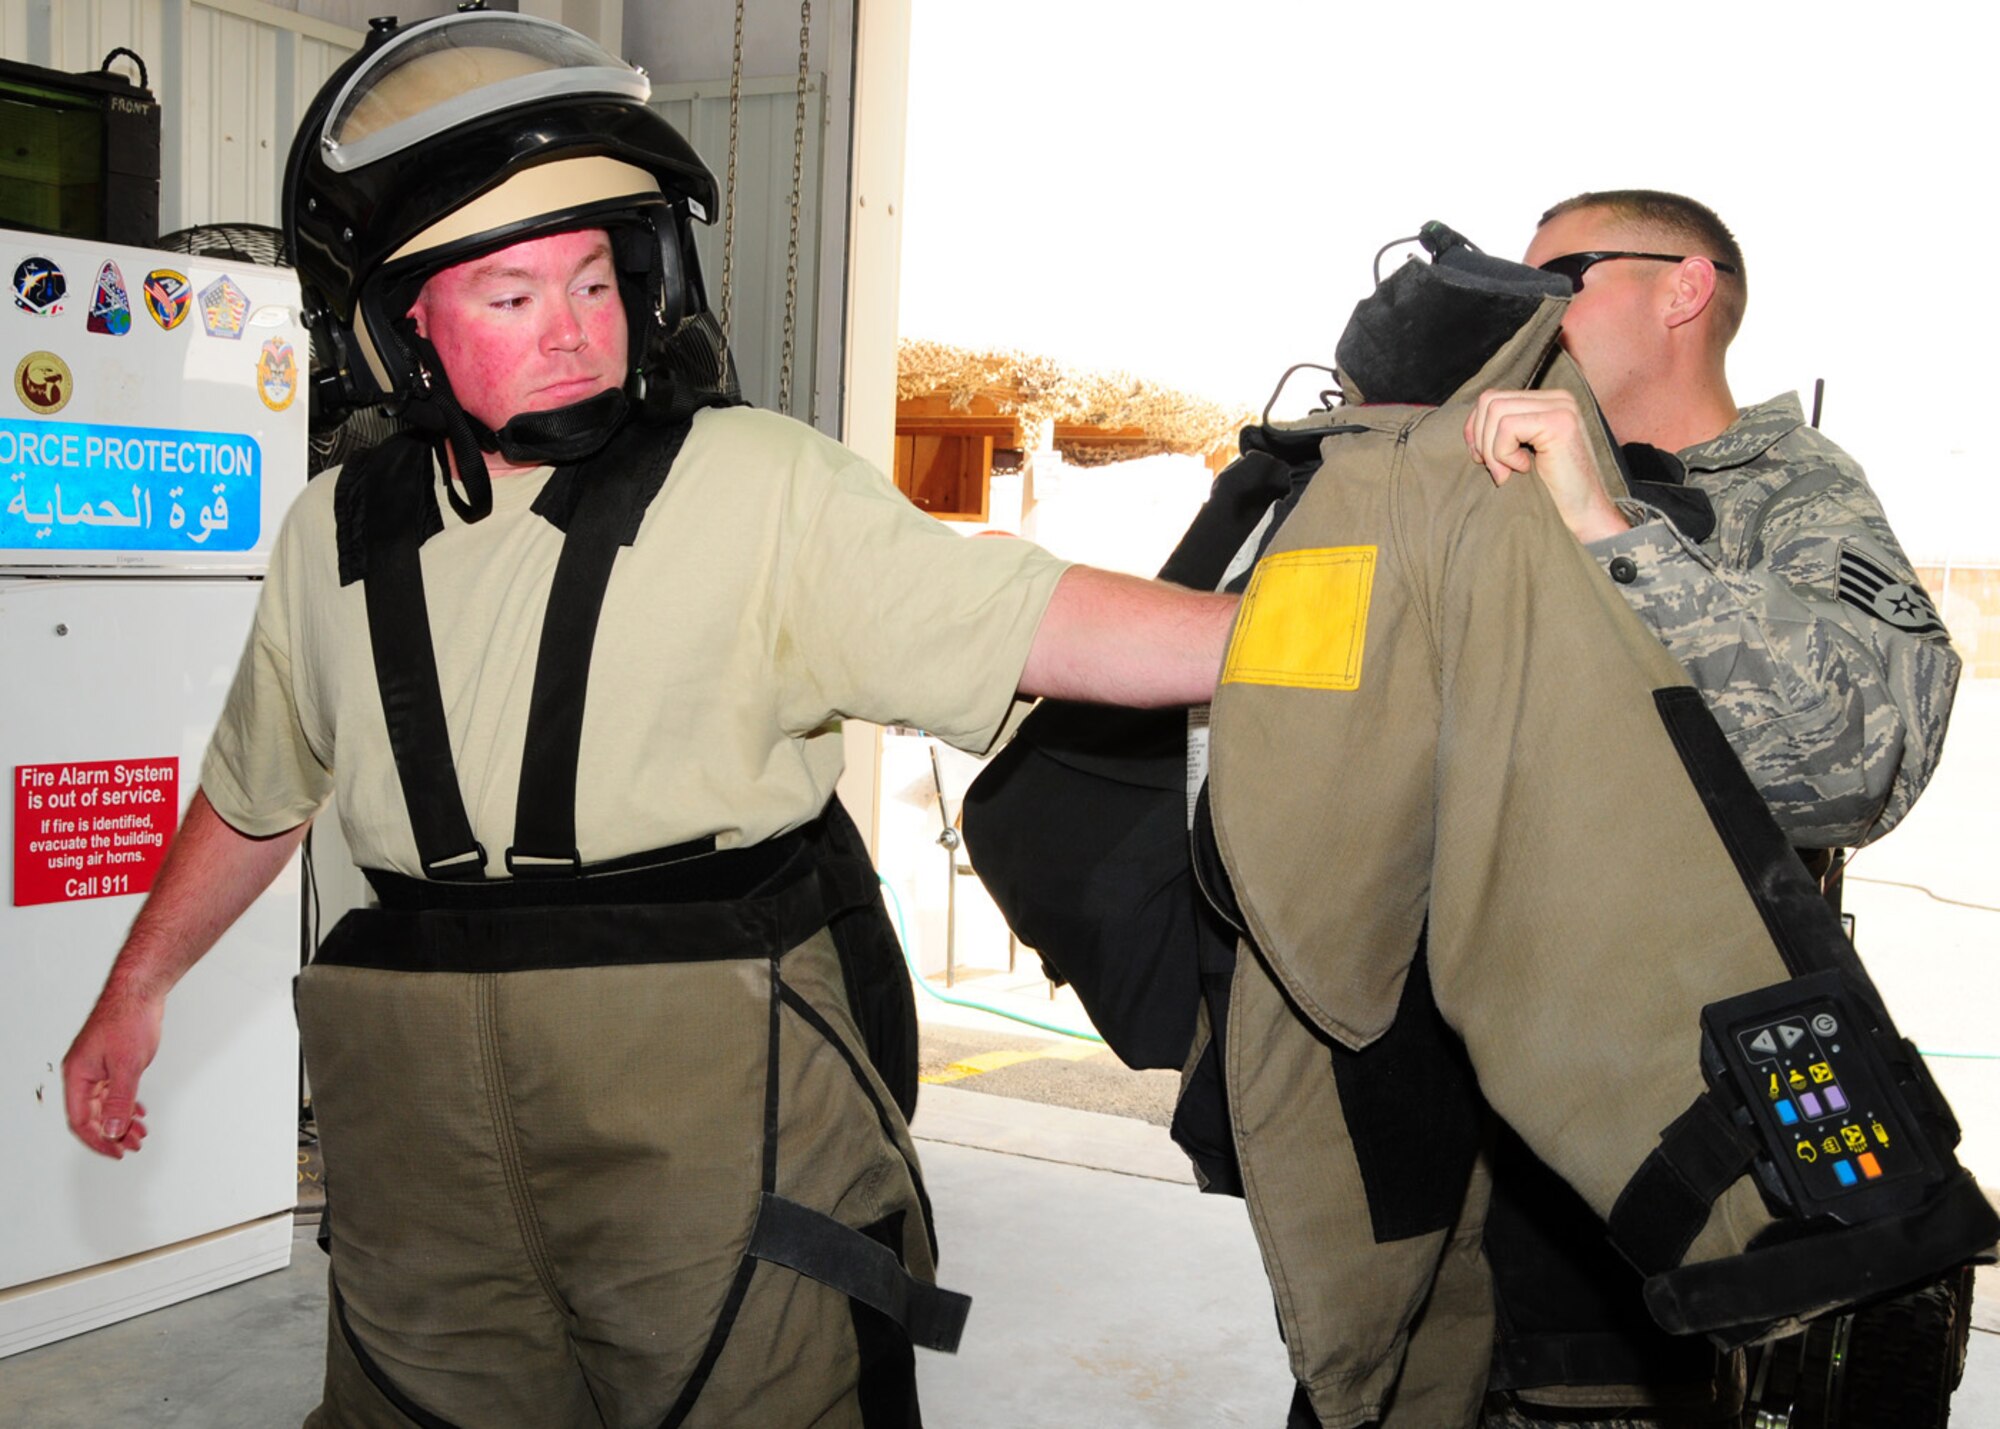 SOUTHWEST ASIA -- Tech. Sgt. Michael O'Toole, 386th Expeditionary Civil Engineer Squadron explosive ordnance disposal, receives assistance with the donning of the Explosive Ordnance Disposal 9 bomb suit during training at an air base in Southwest Asia, May 27. The EOD 9 bomb suit weighs roughly 75 pounds and provides protection from fragmentation, blast and thermal damage. Sergeant O'Toole is deployed from Luke Air Force Base, Ariz., and is originally from East Durham, N.Y. (U.S. Air Force photo/ Senior Airman Courtney Richardson)